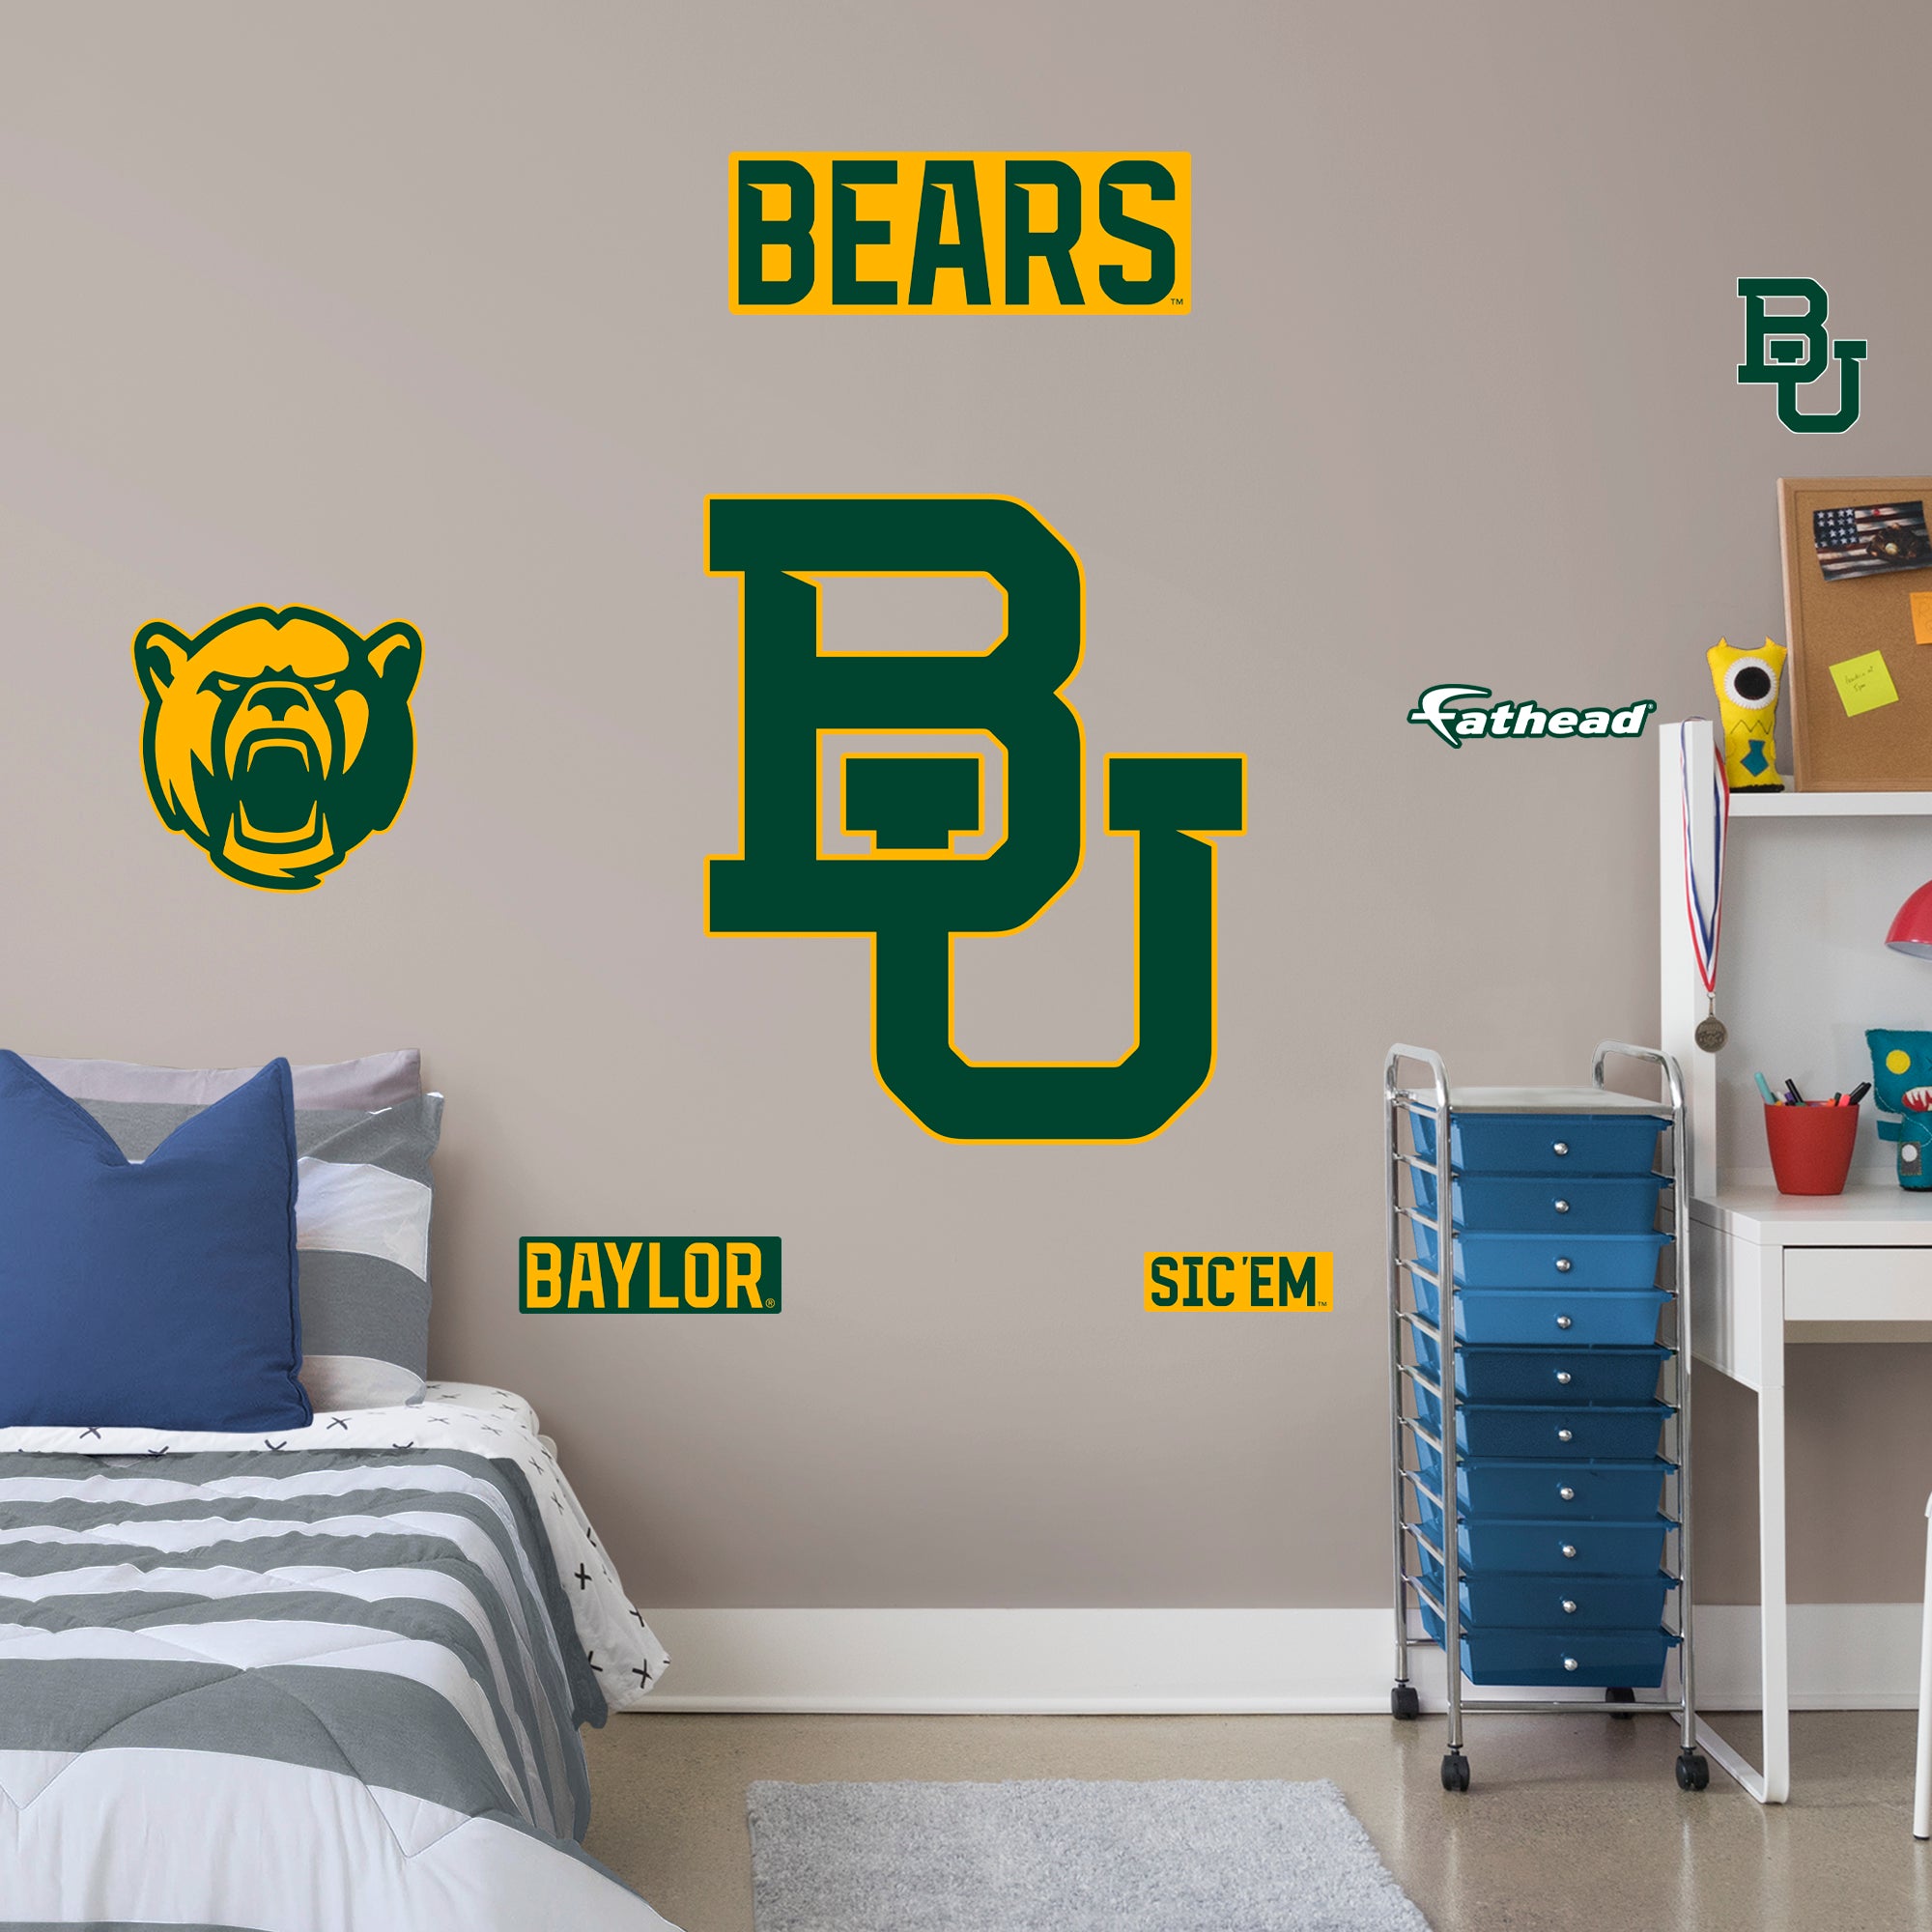 Baylor Bears 2020 RealBig Logo - Officially Licensed NCAA Removable Wall Decal Giant Decal (32"W x 38"H) by Fathead | Vinyl